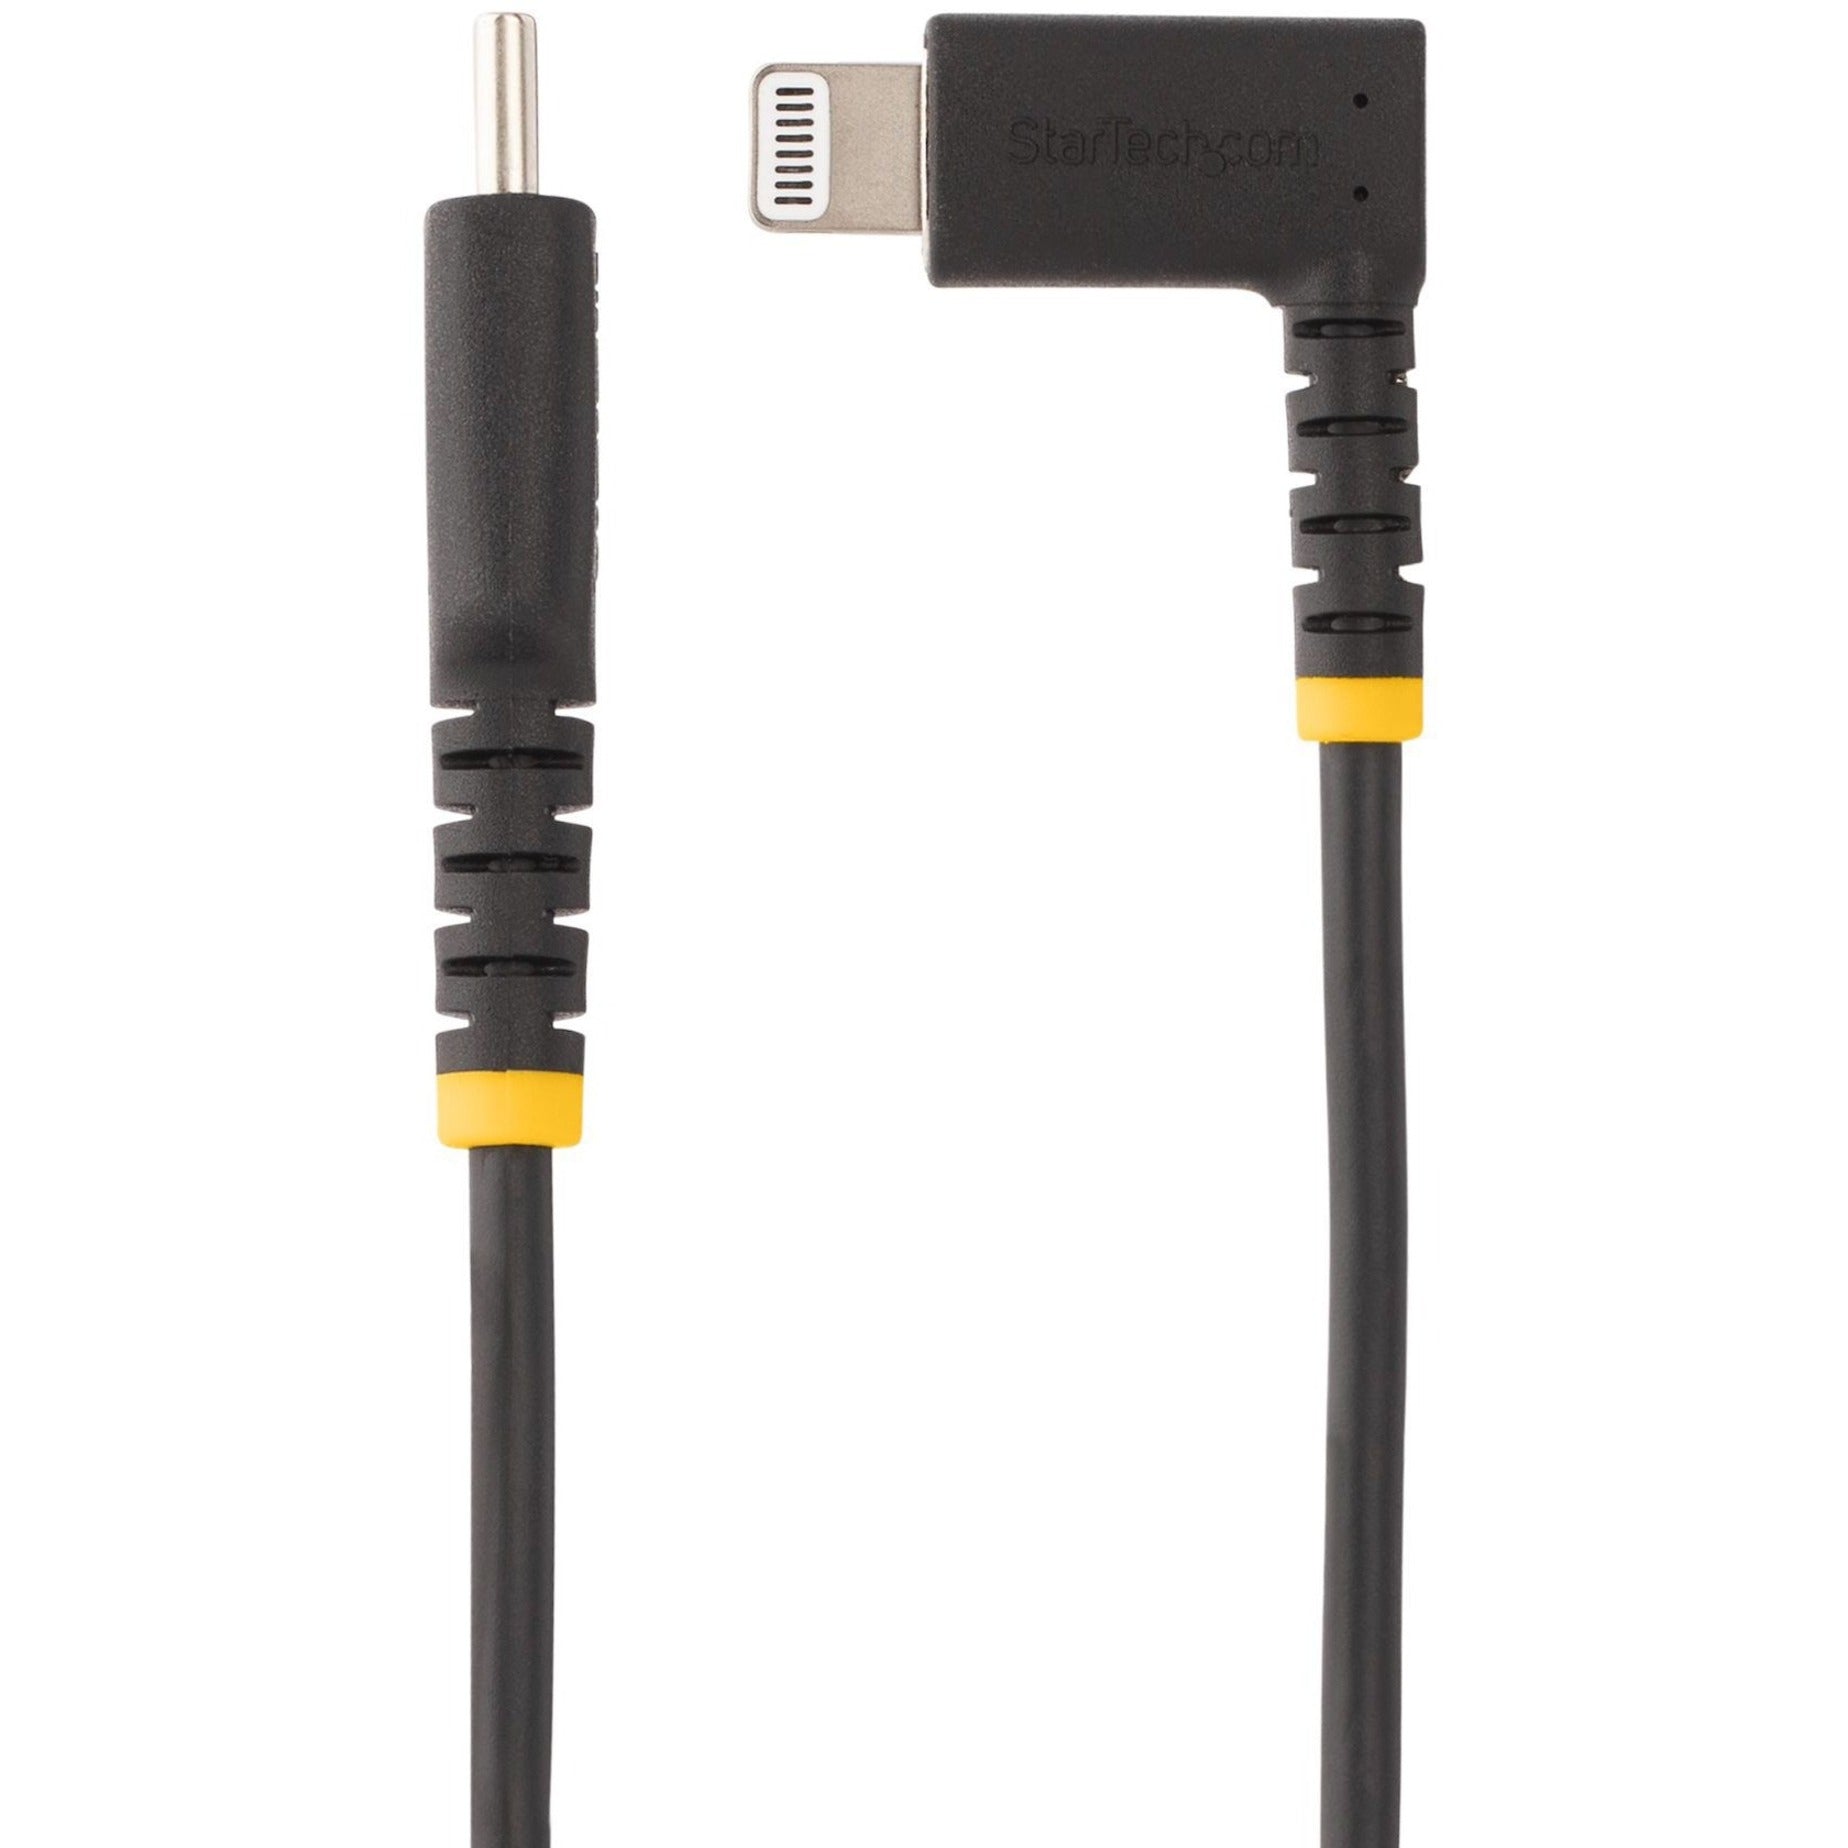 StarTech.com RUSB2CLTMM2MR USB-C to Right Angle Lightning Cable, 6FT, Fast Charging, Apple iPhone/iPad Compatible